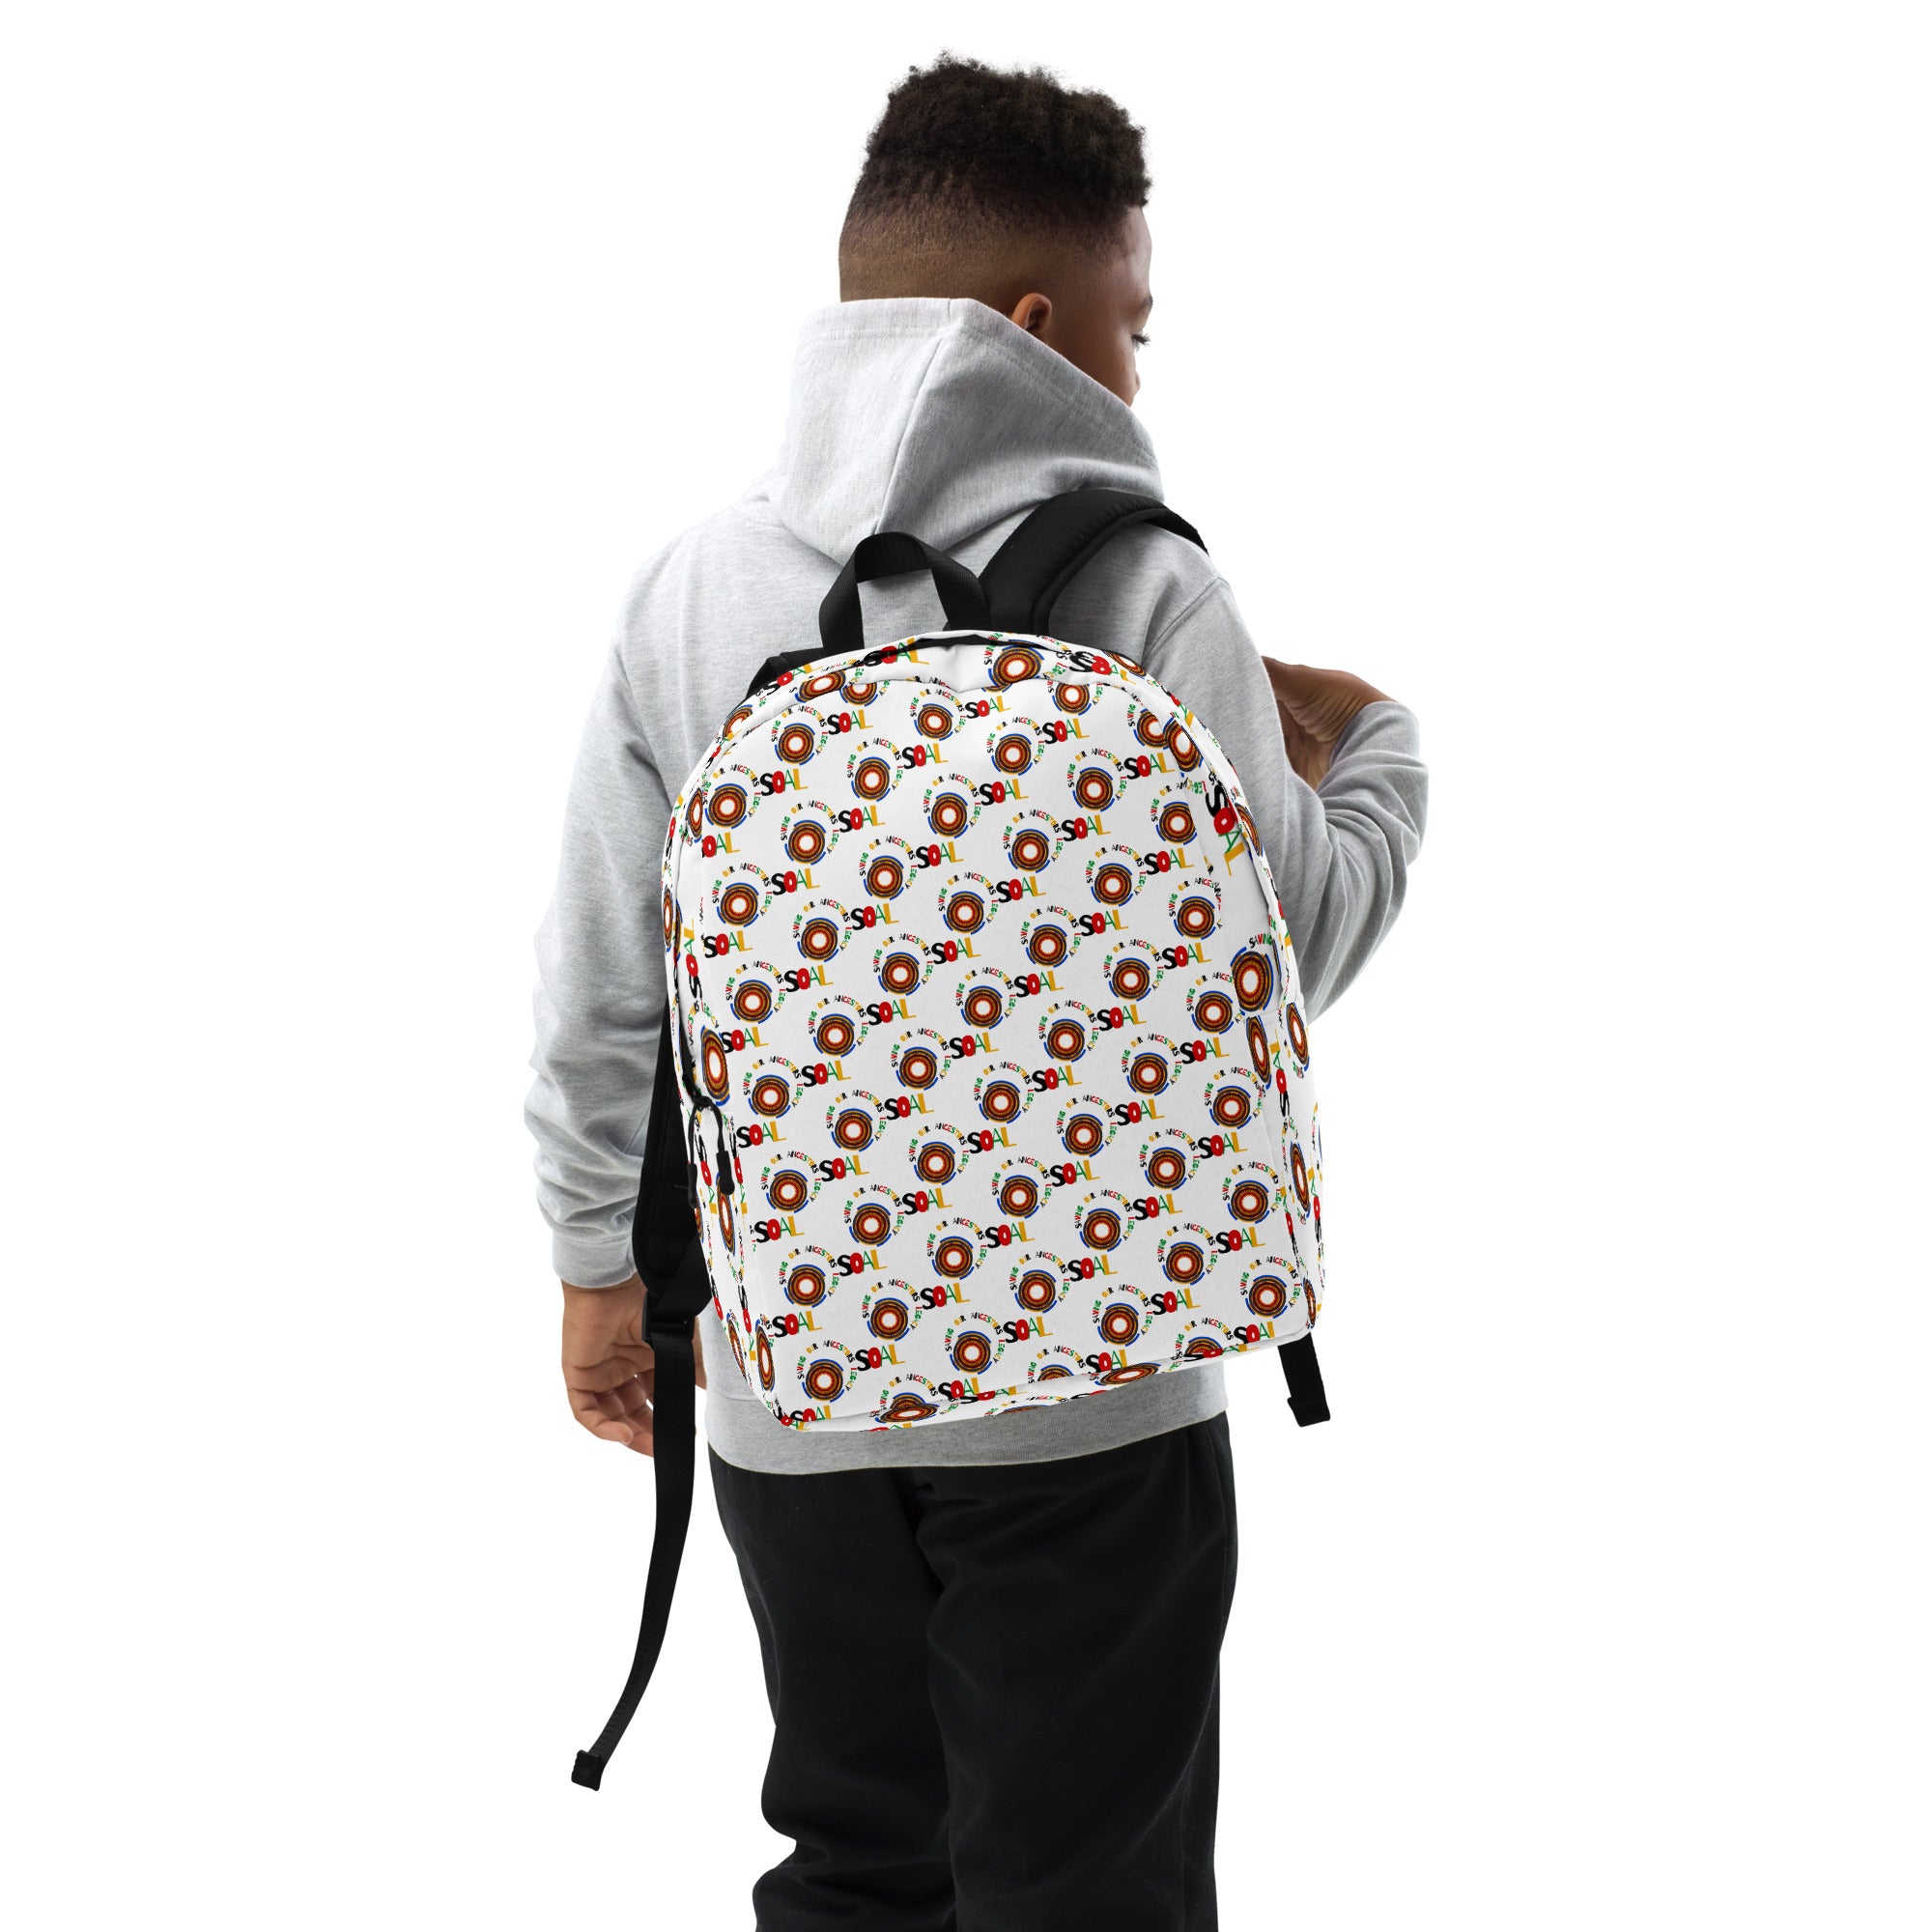 Is That The New All Over Print Backpack ??